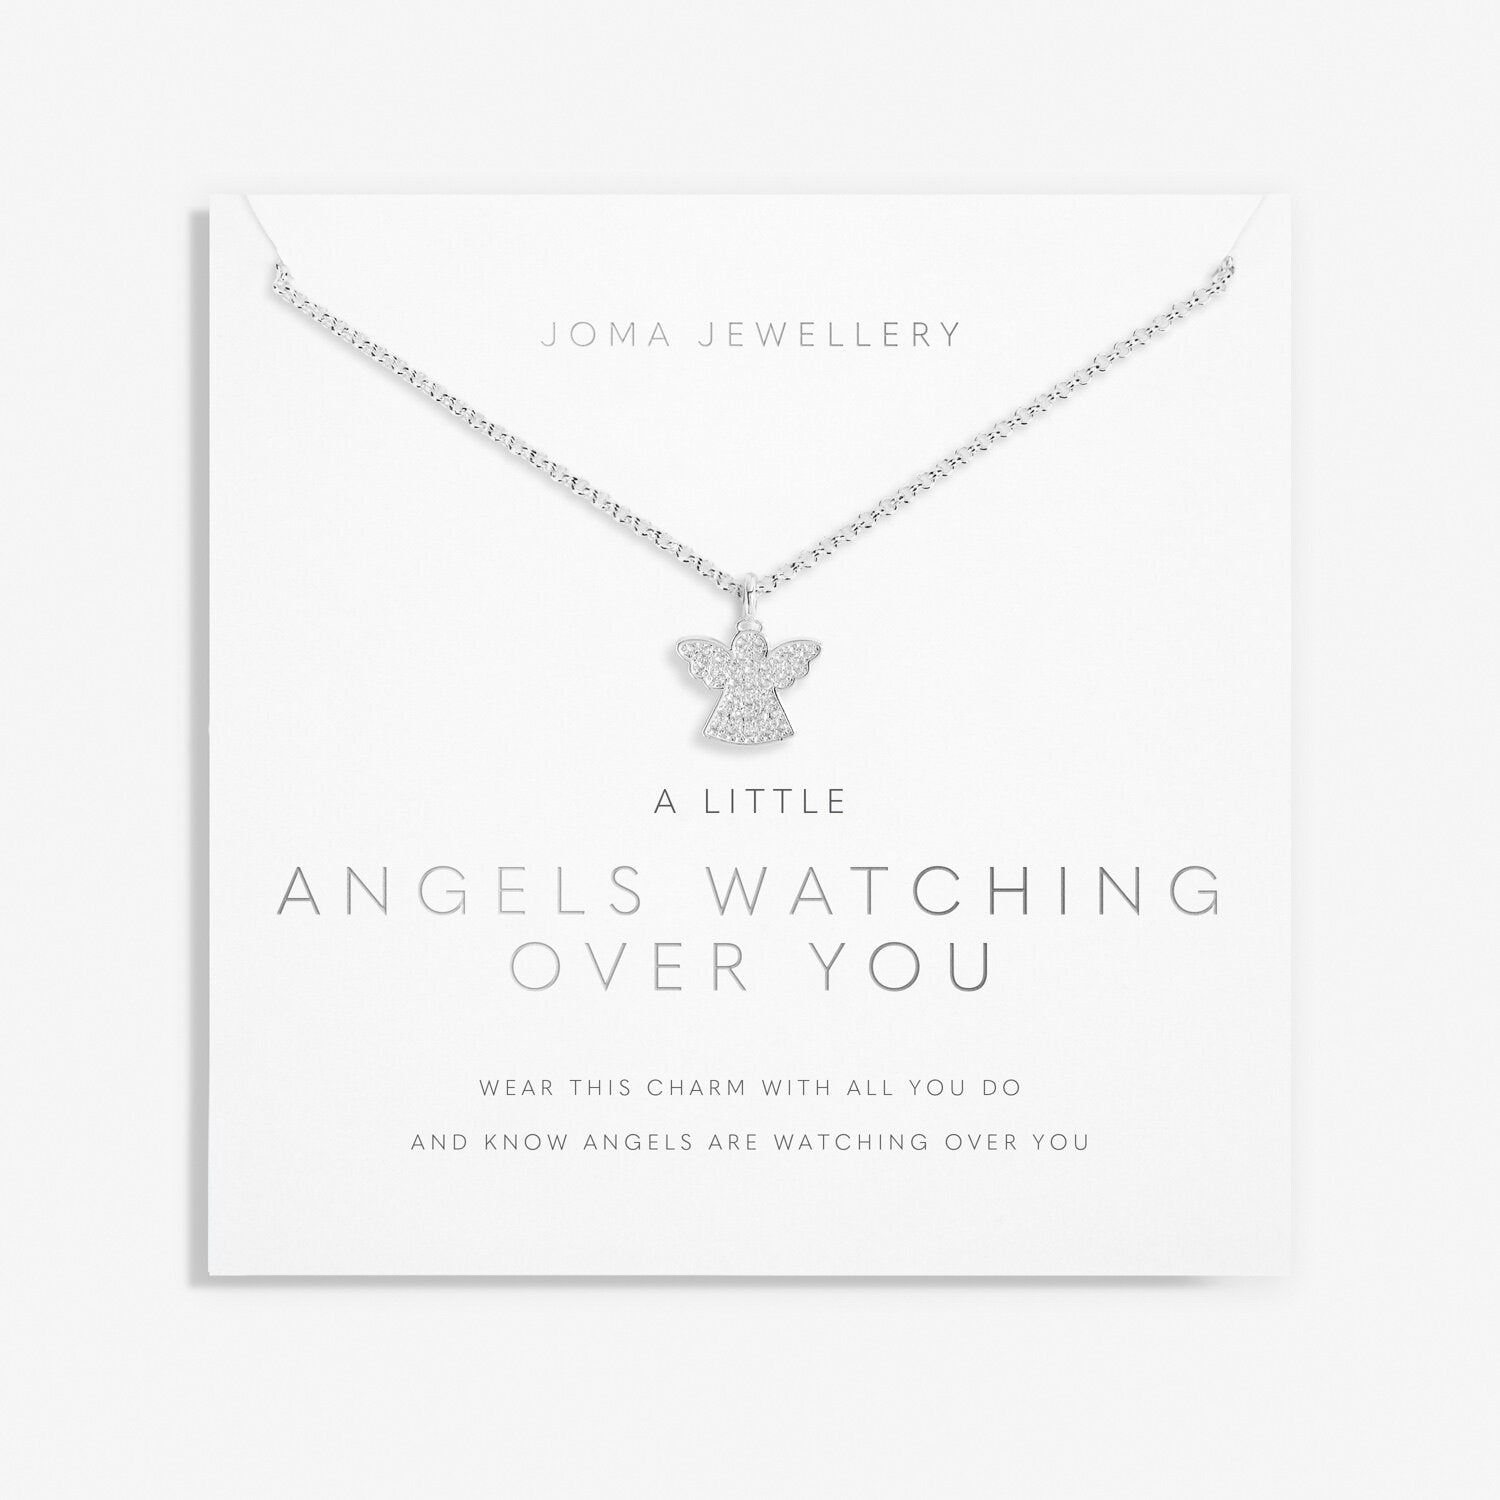 A Little - Angels Watching Over You - Joma Jewellery